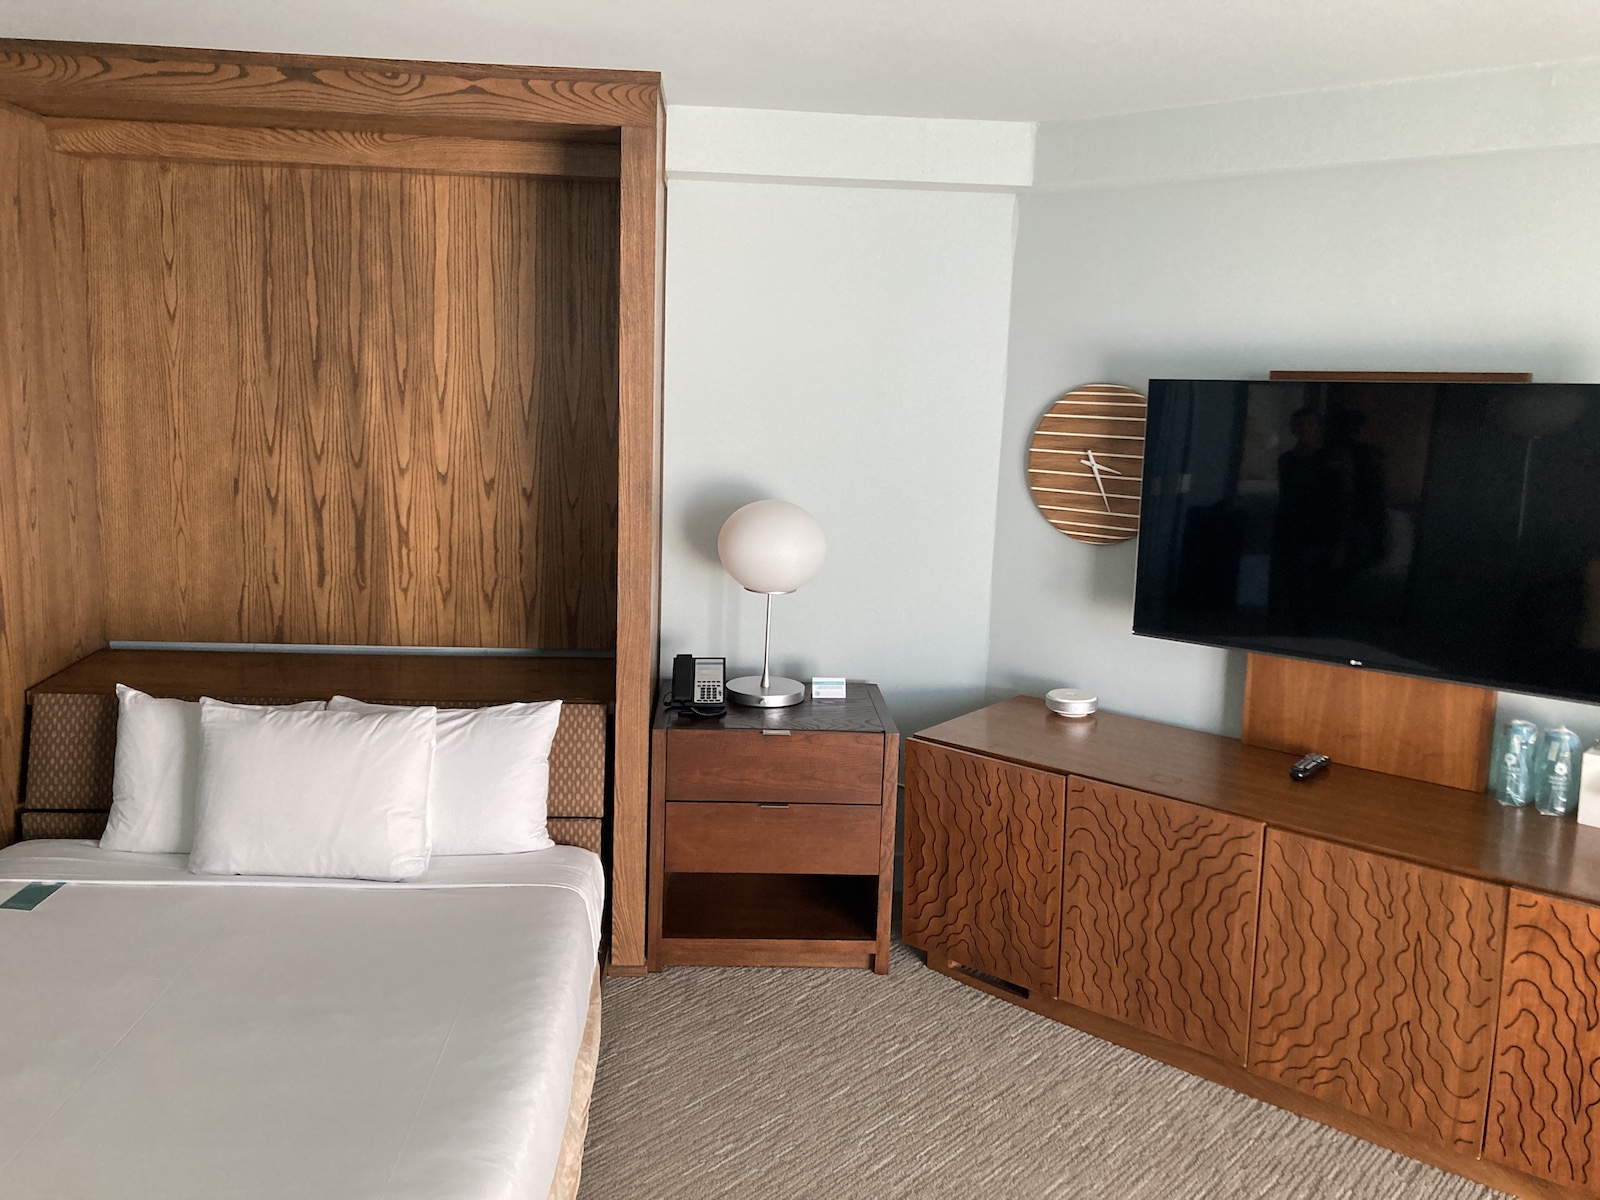 Photo shows the Murphy bed on the left side, a nightstand in the middle, and a dresser with TV above it on the right side